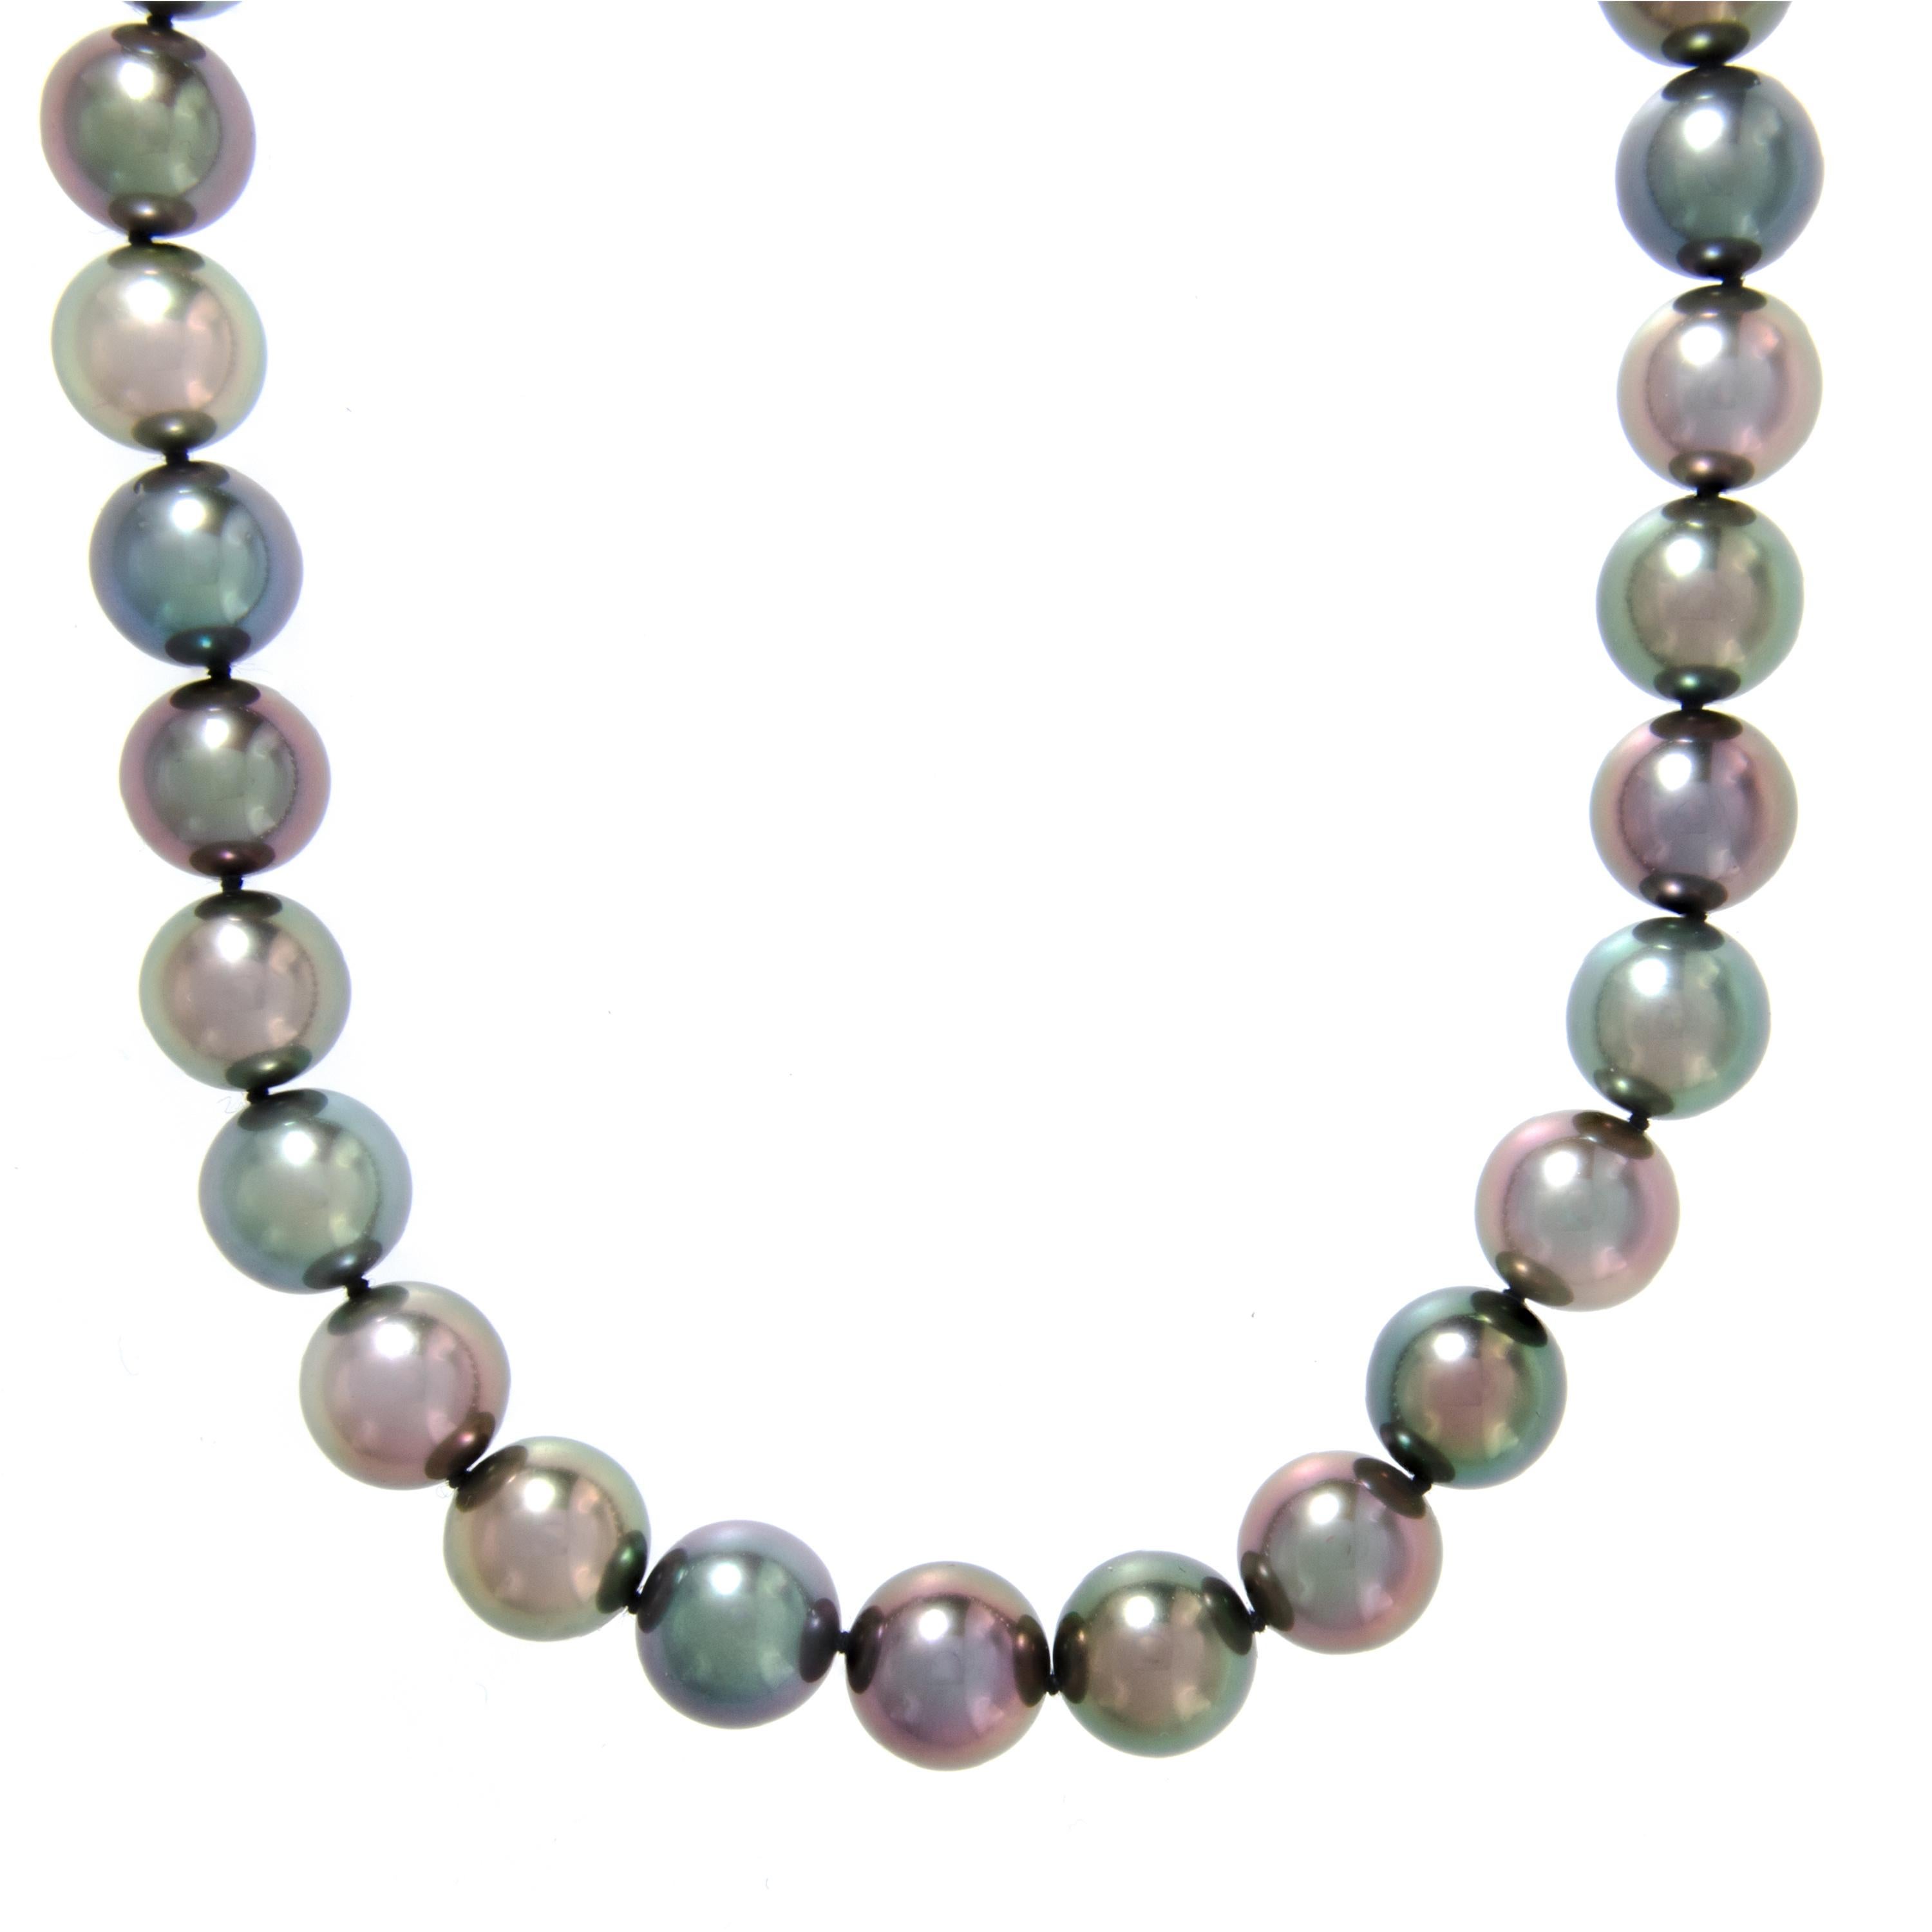 This necklace is comprised of 43 Tahitian cultured pearls graduating in size from 9-10 mm with an 18 karat white gold “X” clasp. Pearls are true AAA quality with excellent luster and clean surface. But what makes these pearls so eye-catching is the